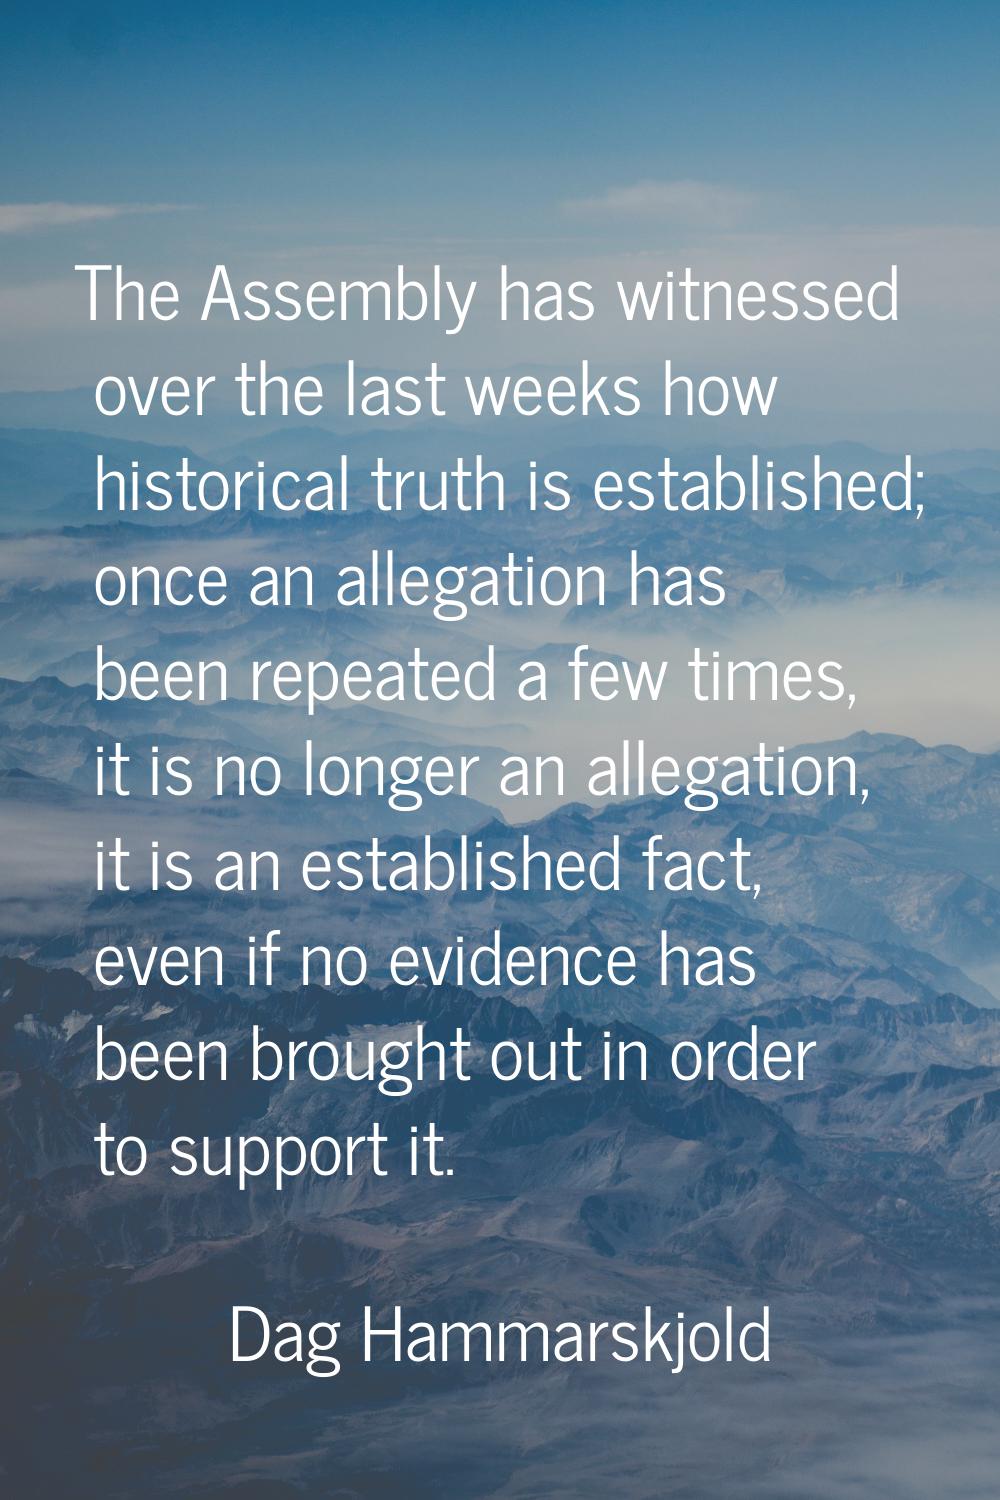 The Assembly has witnessed over the last weeks how historical truth is established; once an allegat